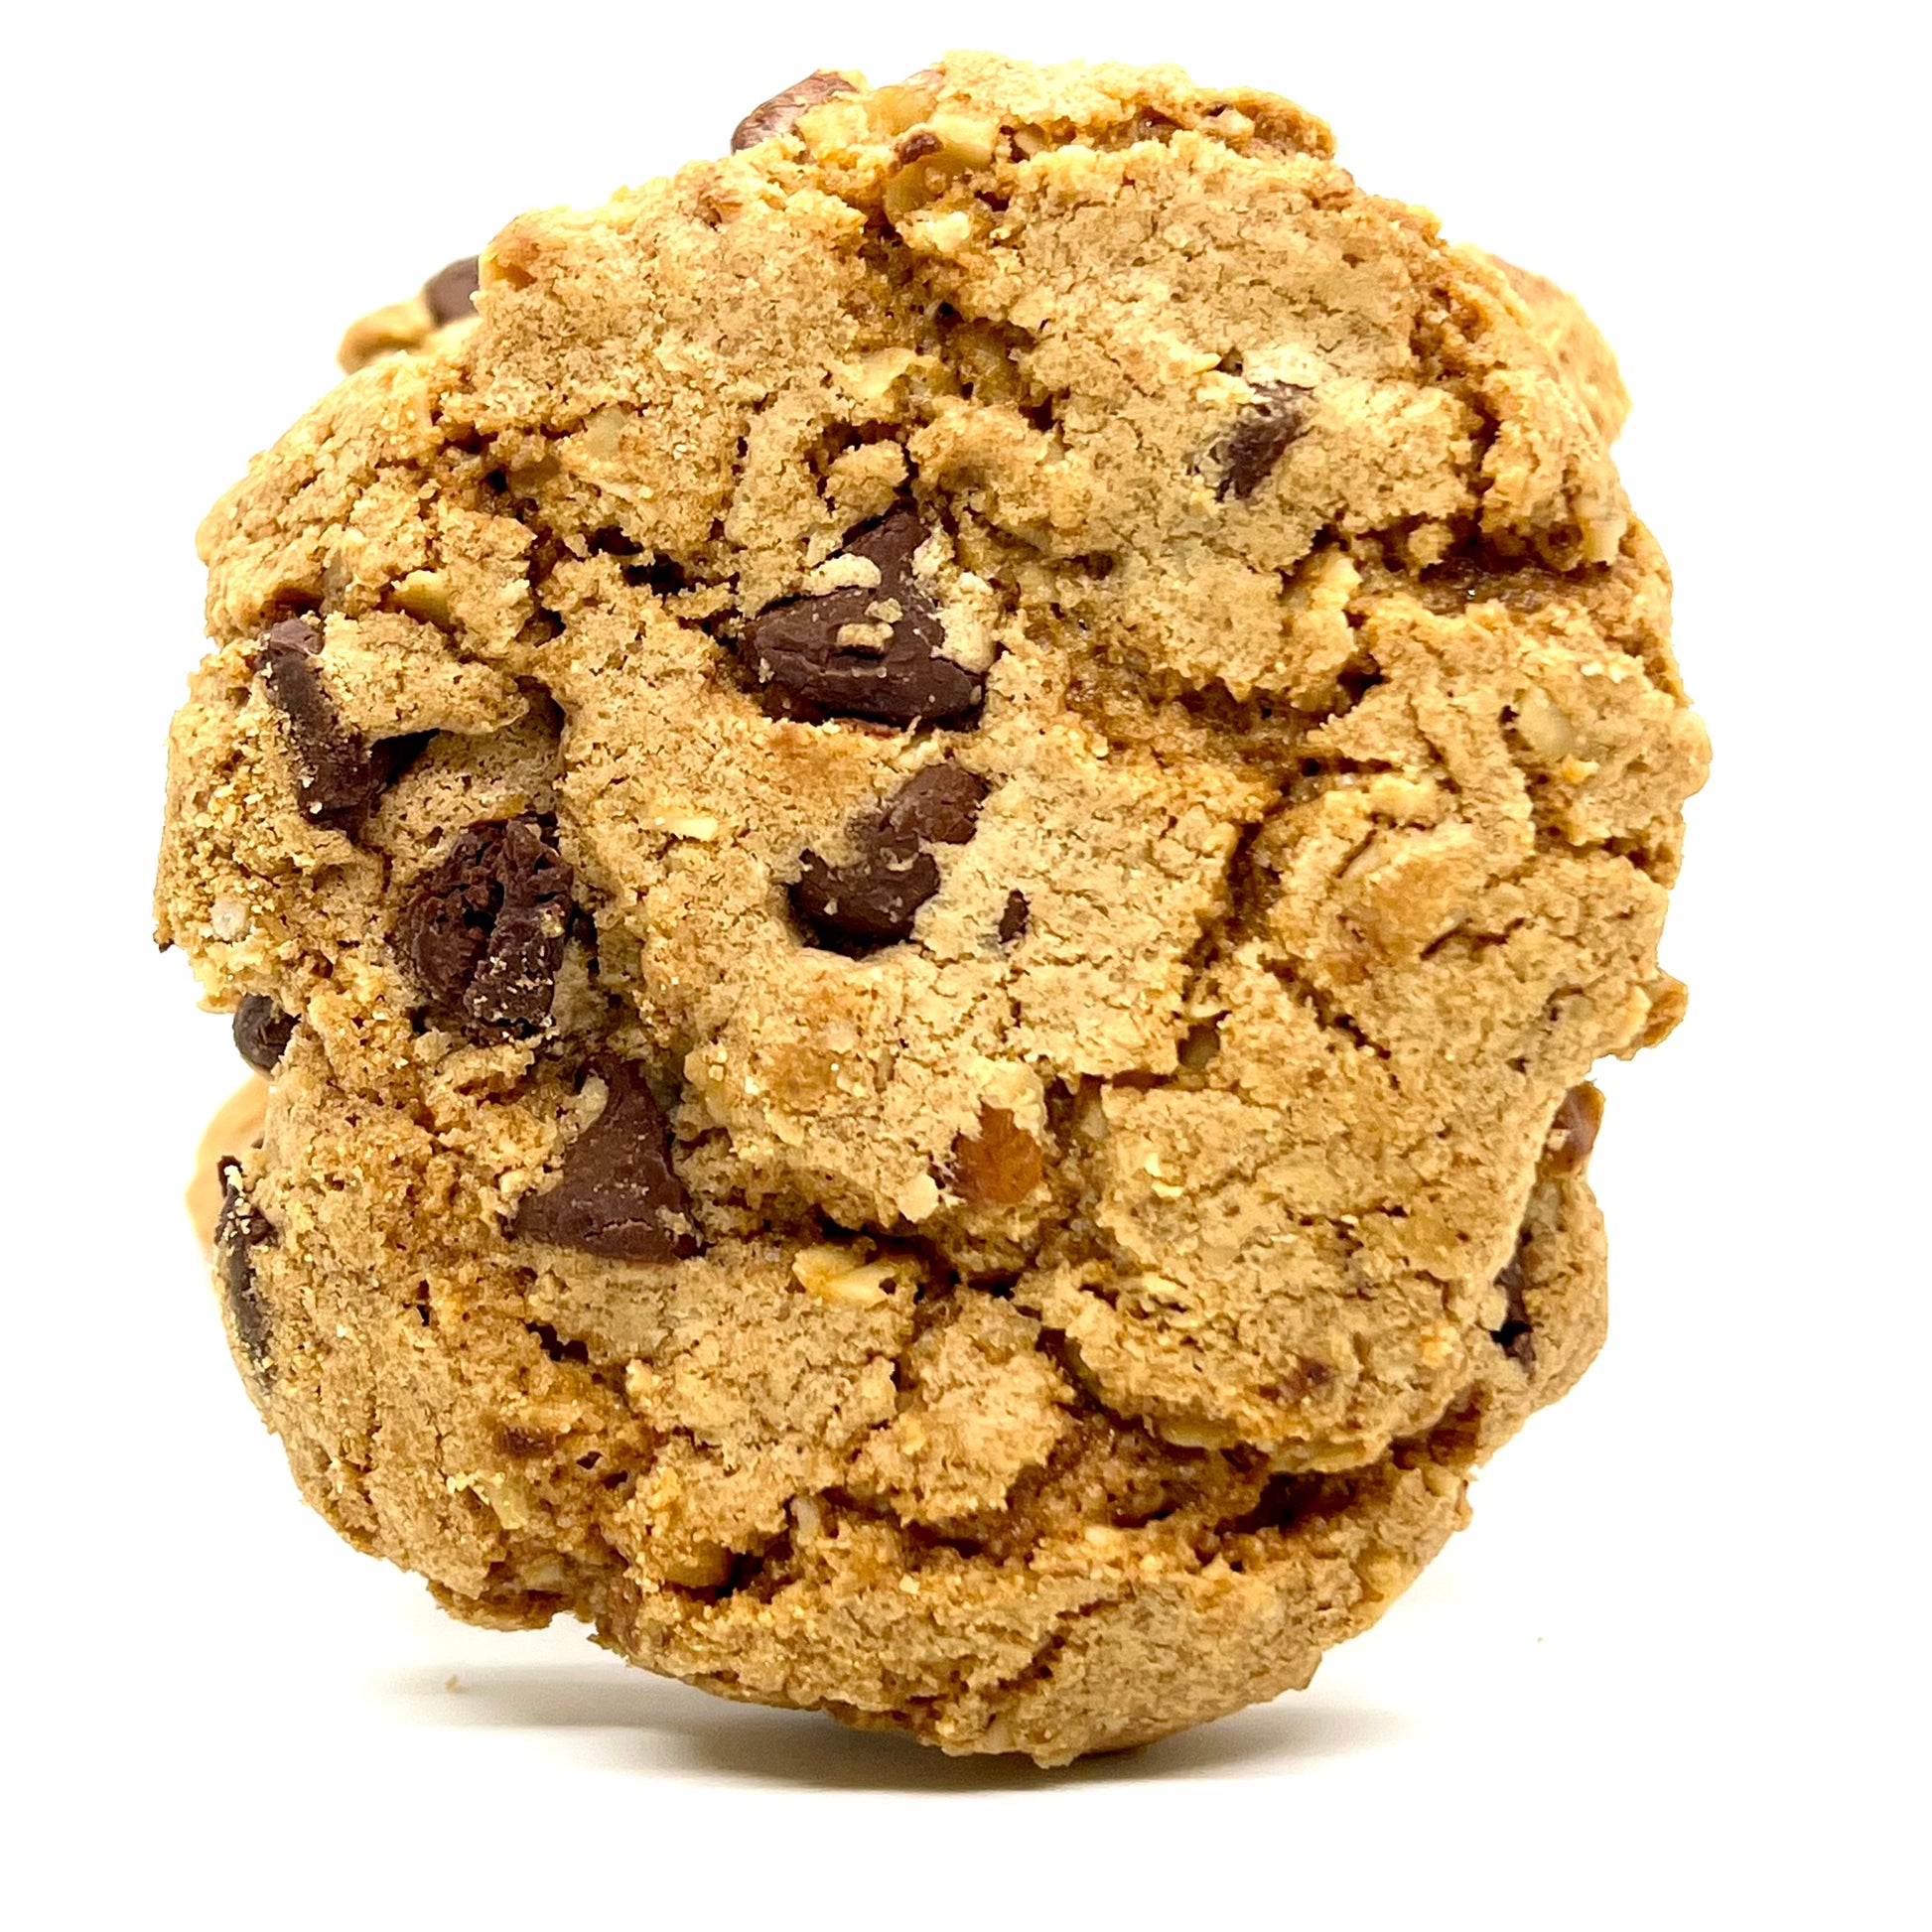 Oatmeal Chocolate Chip Cookies - Wholesale Unlimited Inc.